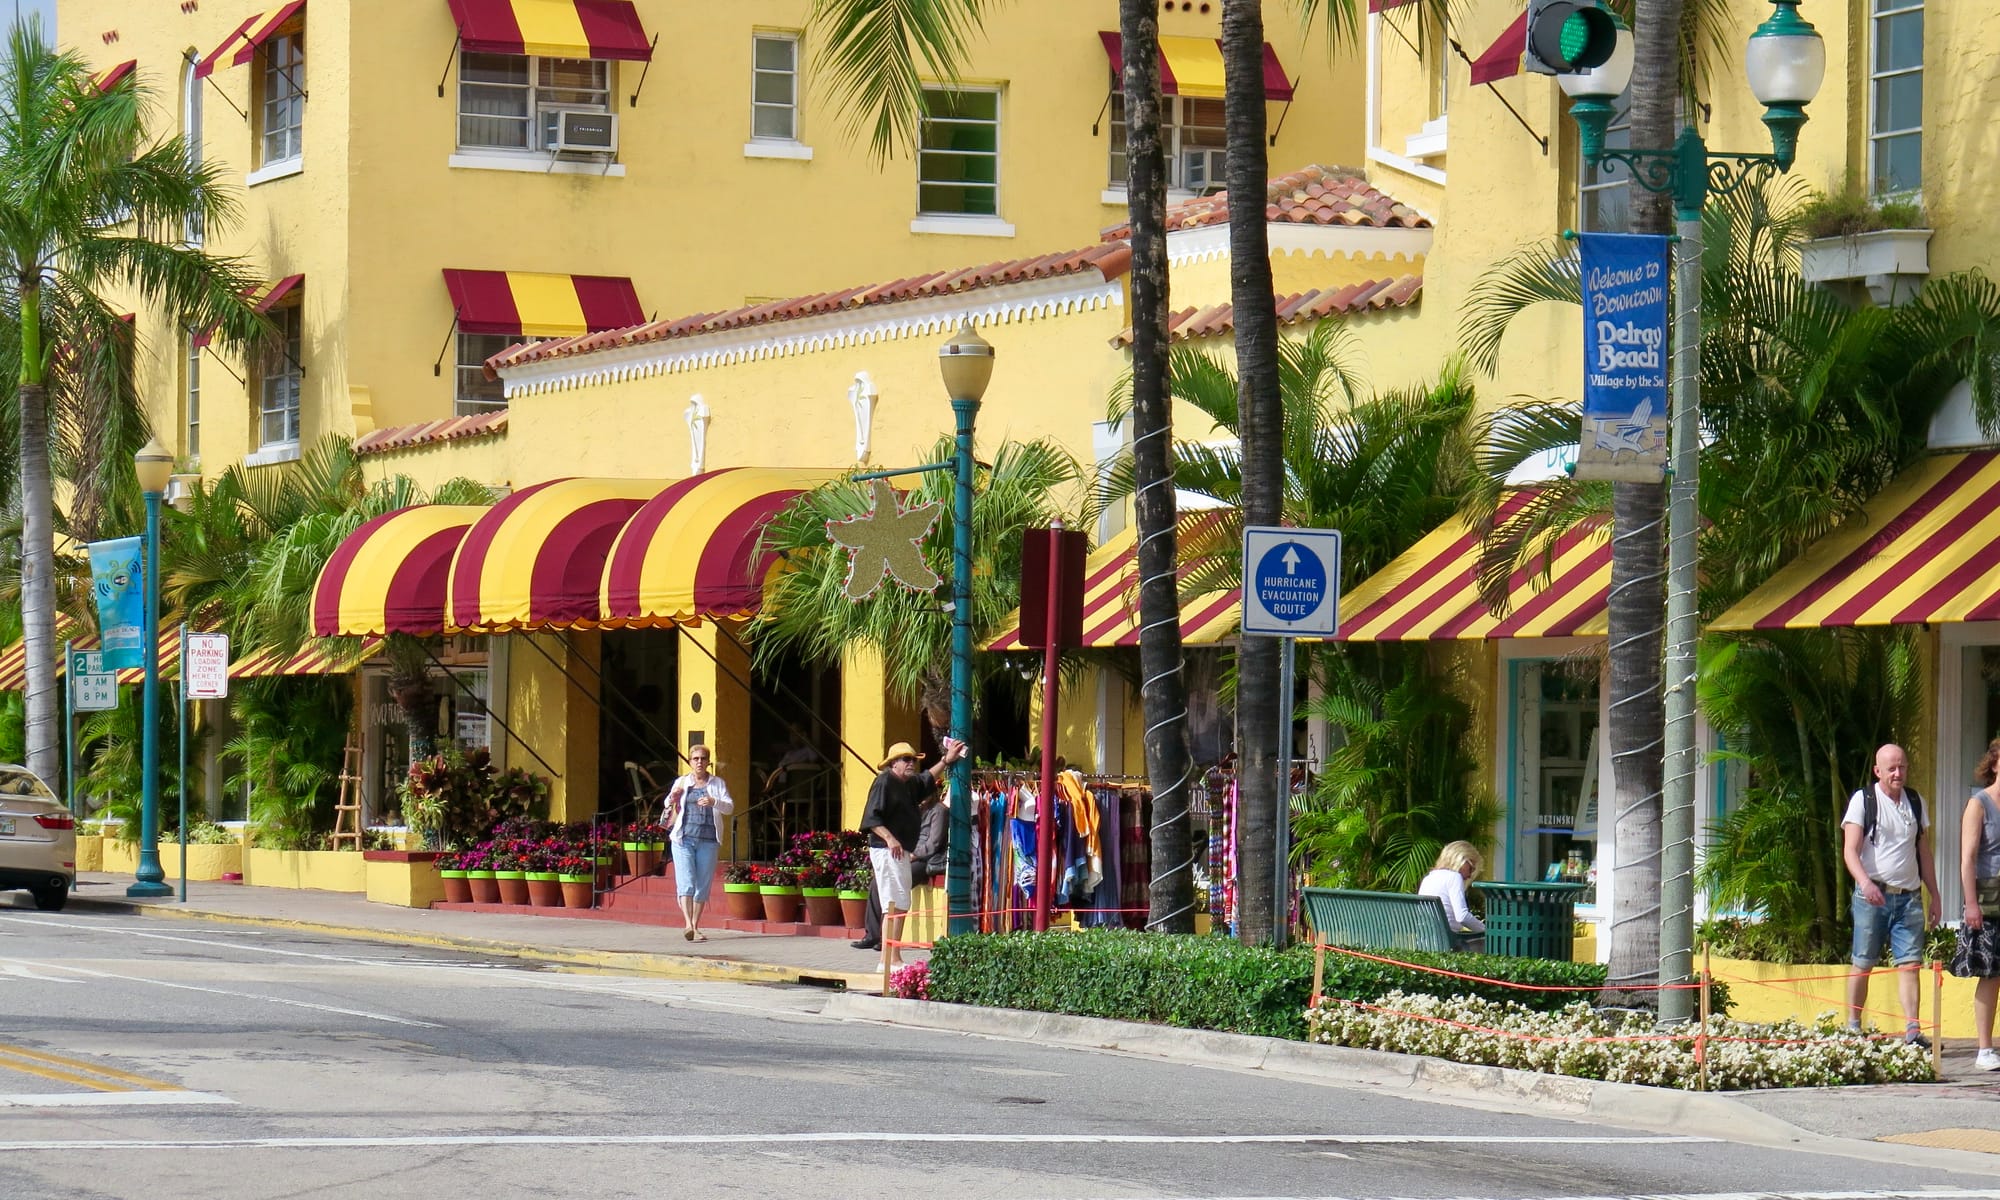 Delray Beach Hotels - Only the Colony Hotel Adds Value, the Others Subtract